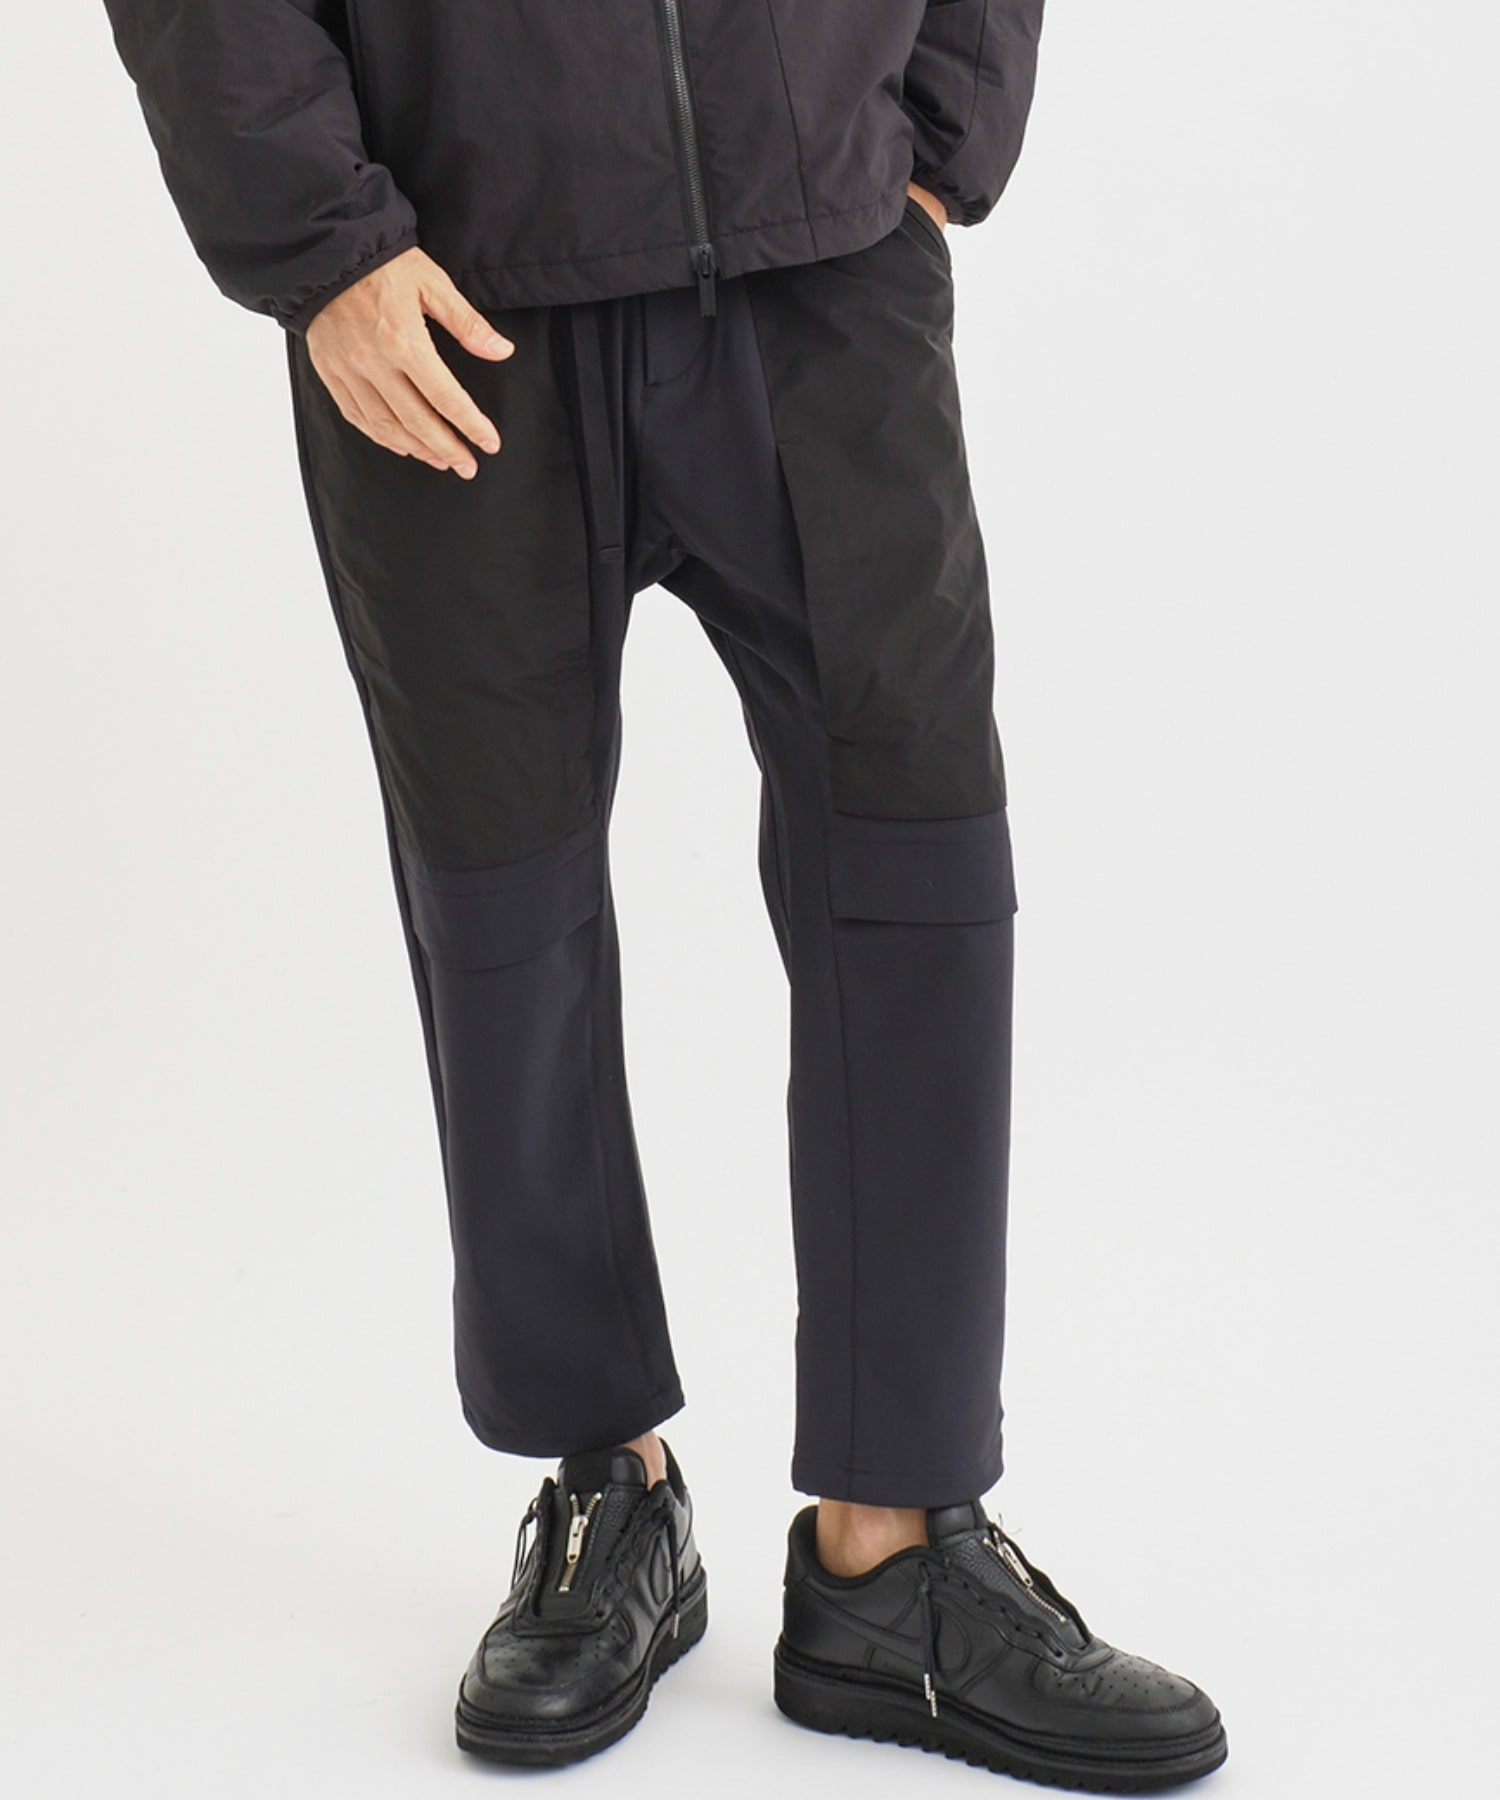 WINDSTOPPER STRETCH PANTS ｜ White Mountaineering